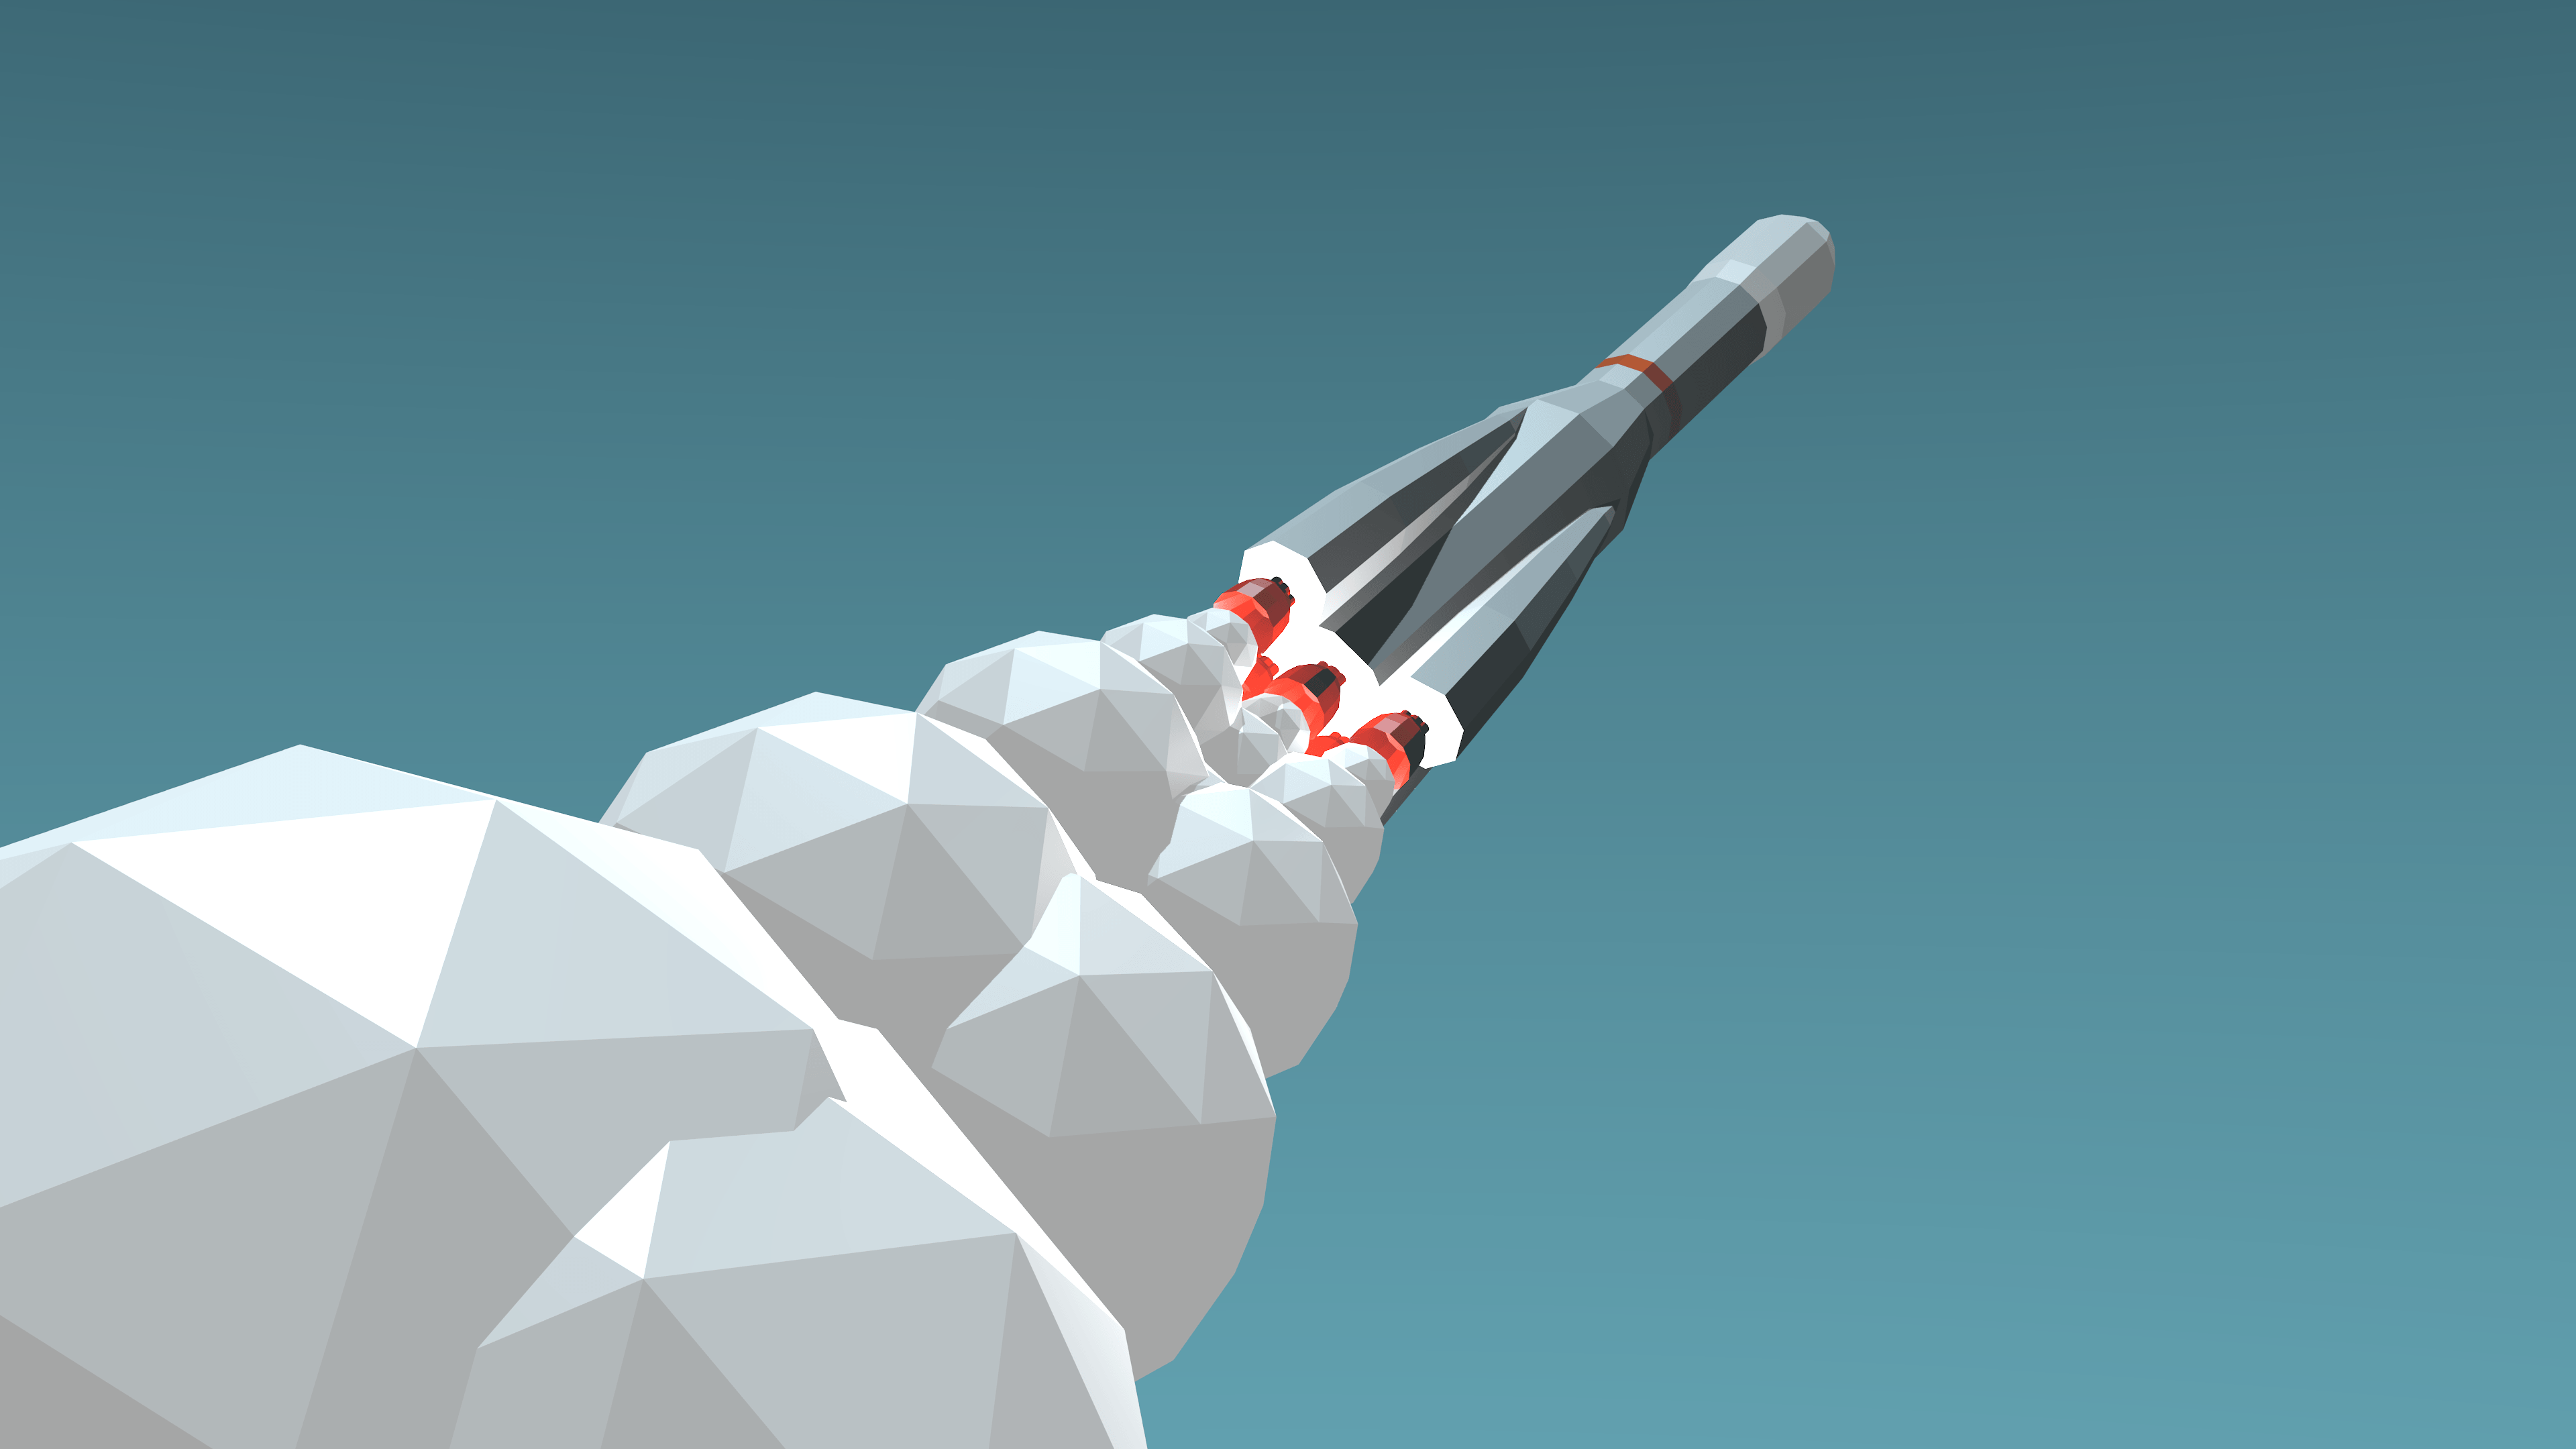 General 3840x2160 blue background rockets low poly